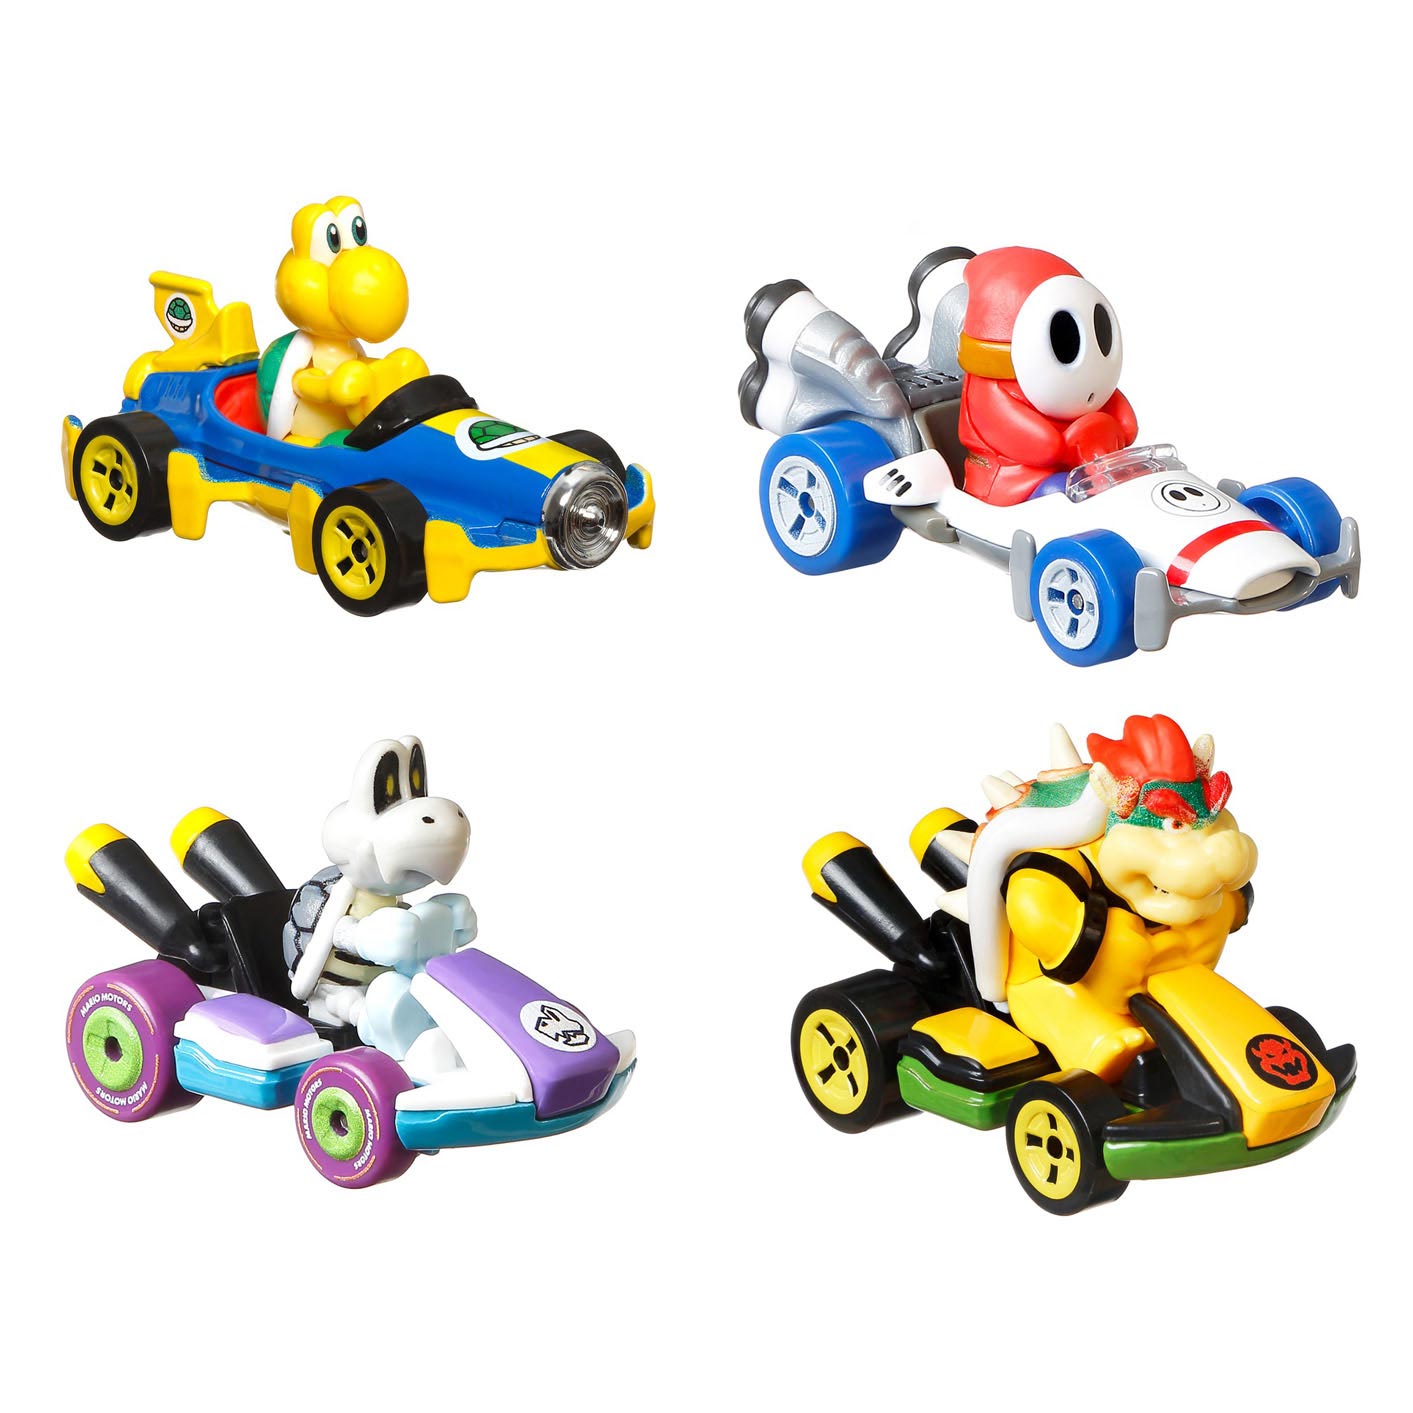 boot Malaise lade Hot Wheels Mario Kart Die-cast 4-Pack #2 | Thimble Toys